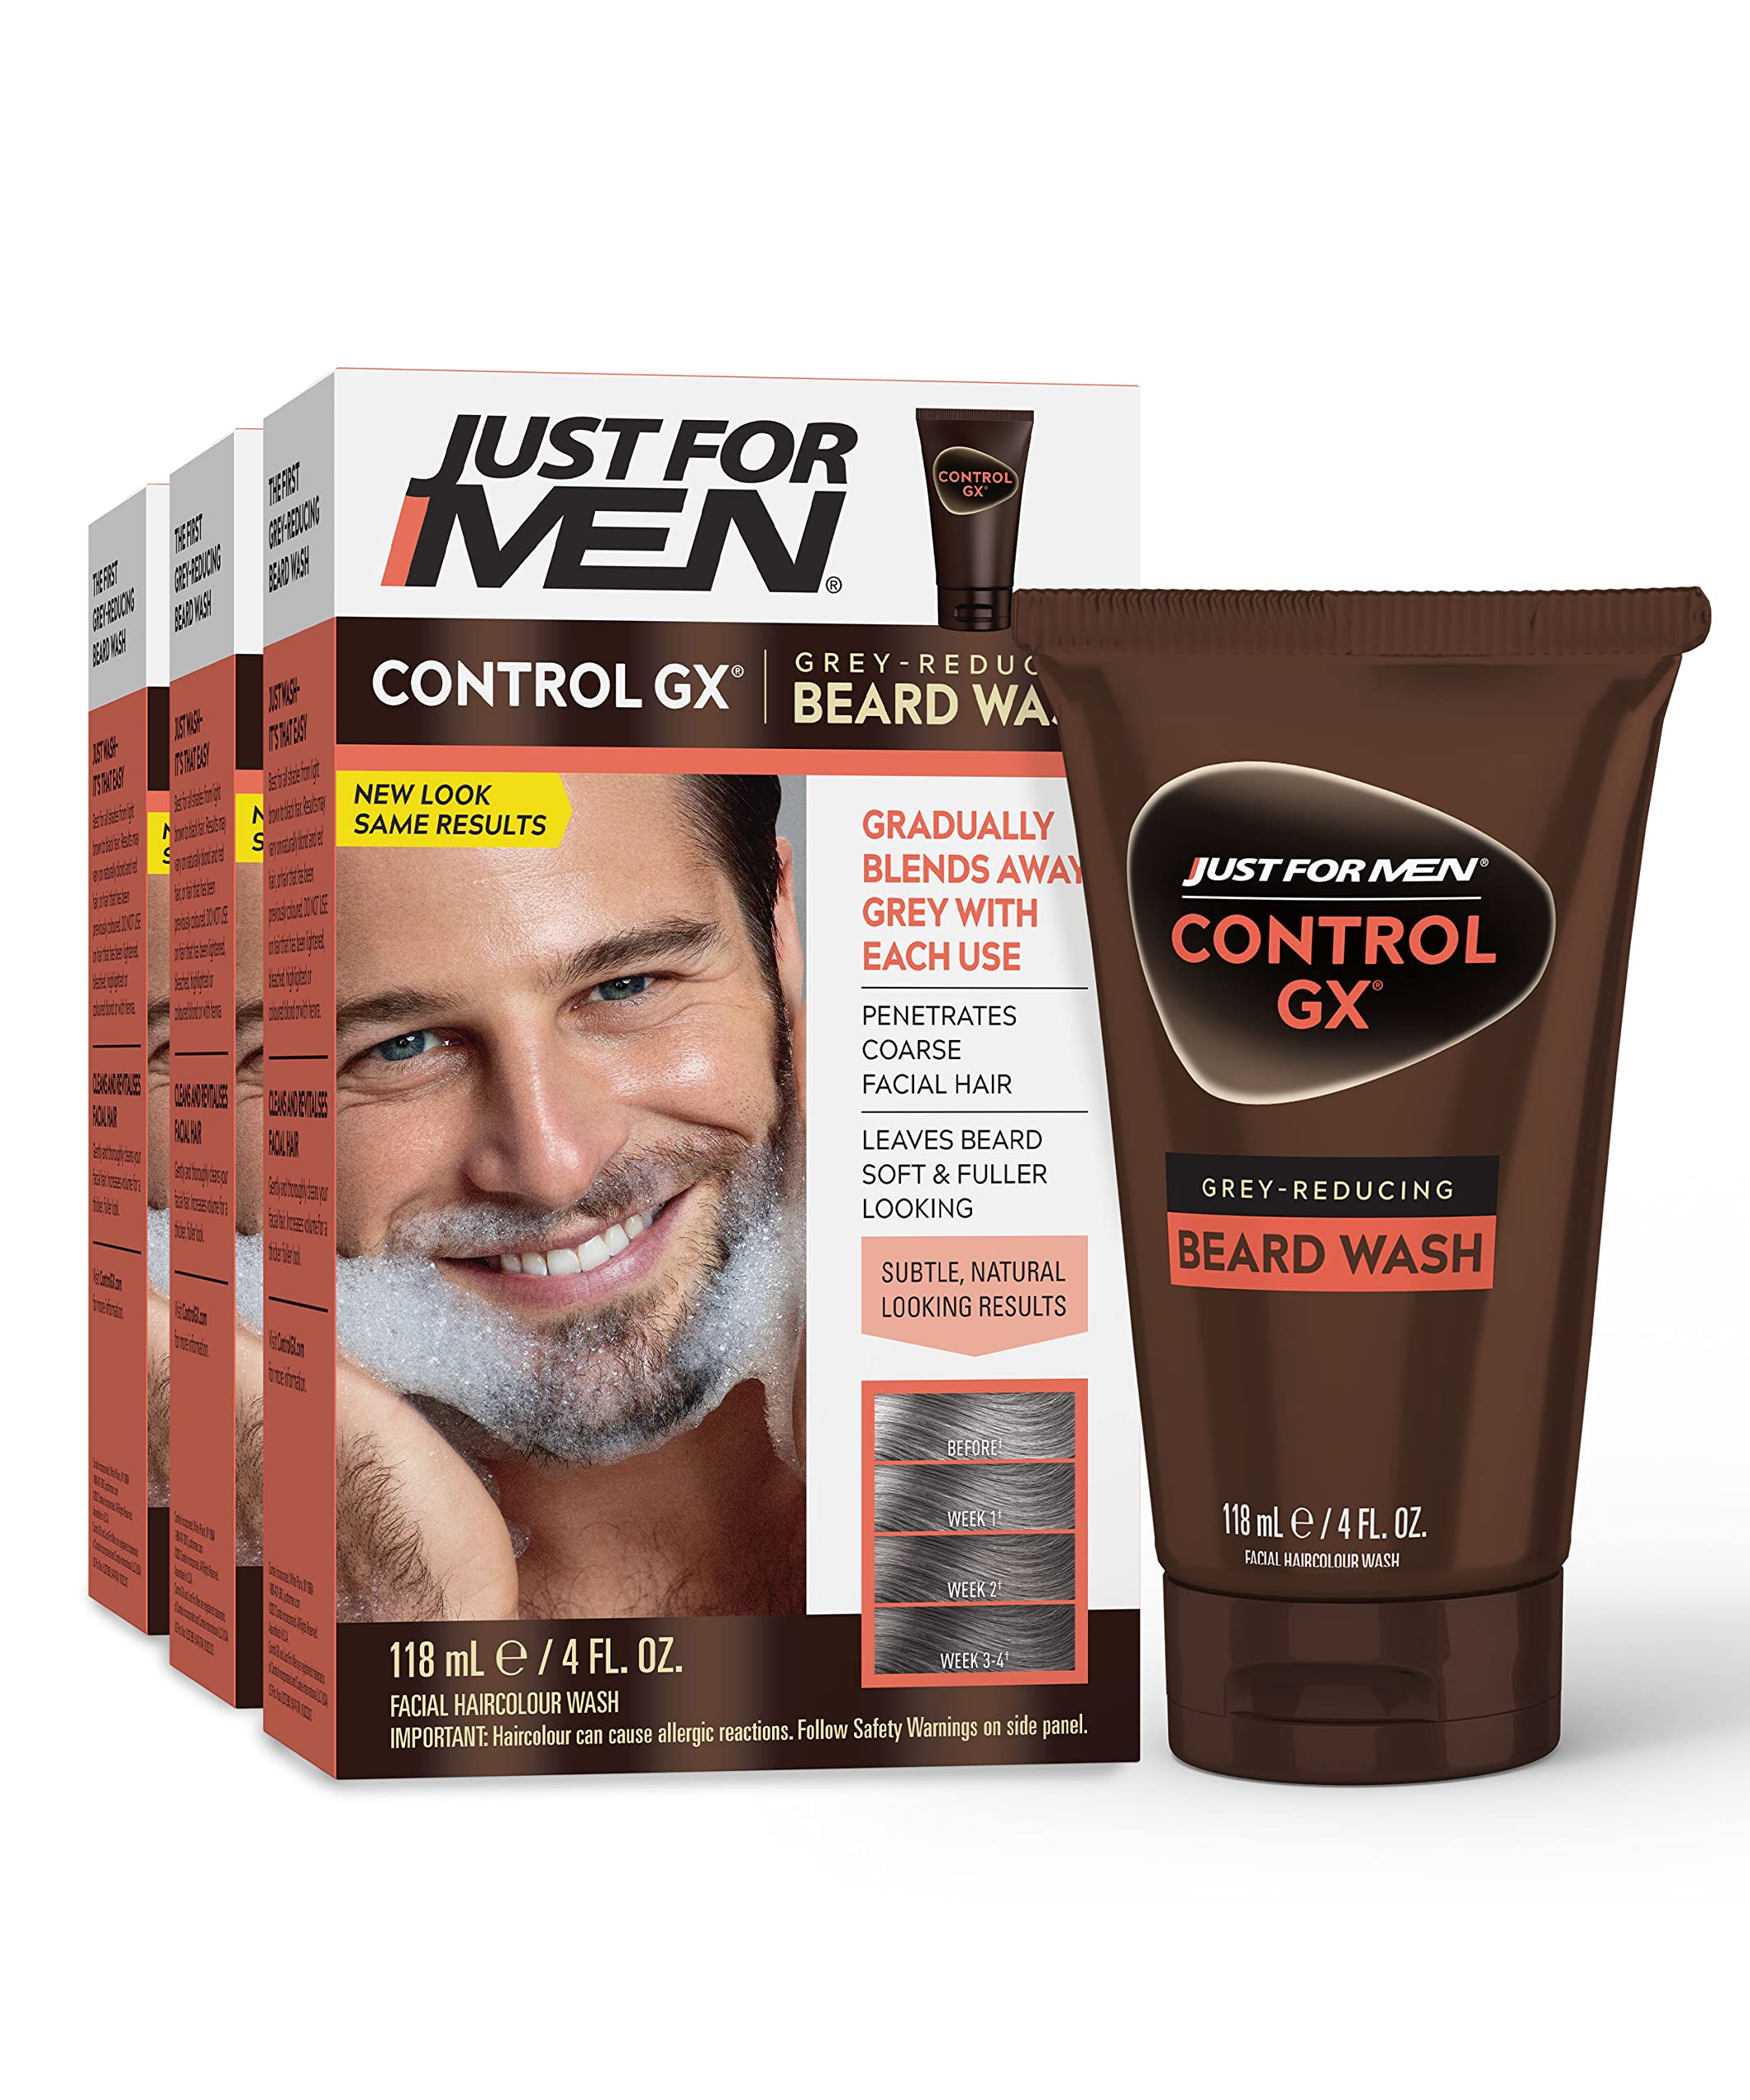 Just For Men Control GX Grey Reducing Beard Wash Shampoo, Gradually Colors Mustache and Beard, Leaves Facial Hair Softer and Fuller, 4 Fl Oz - Pack of 3 (Packaging May Vary)